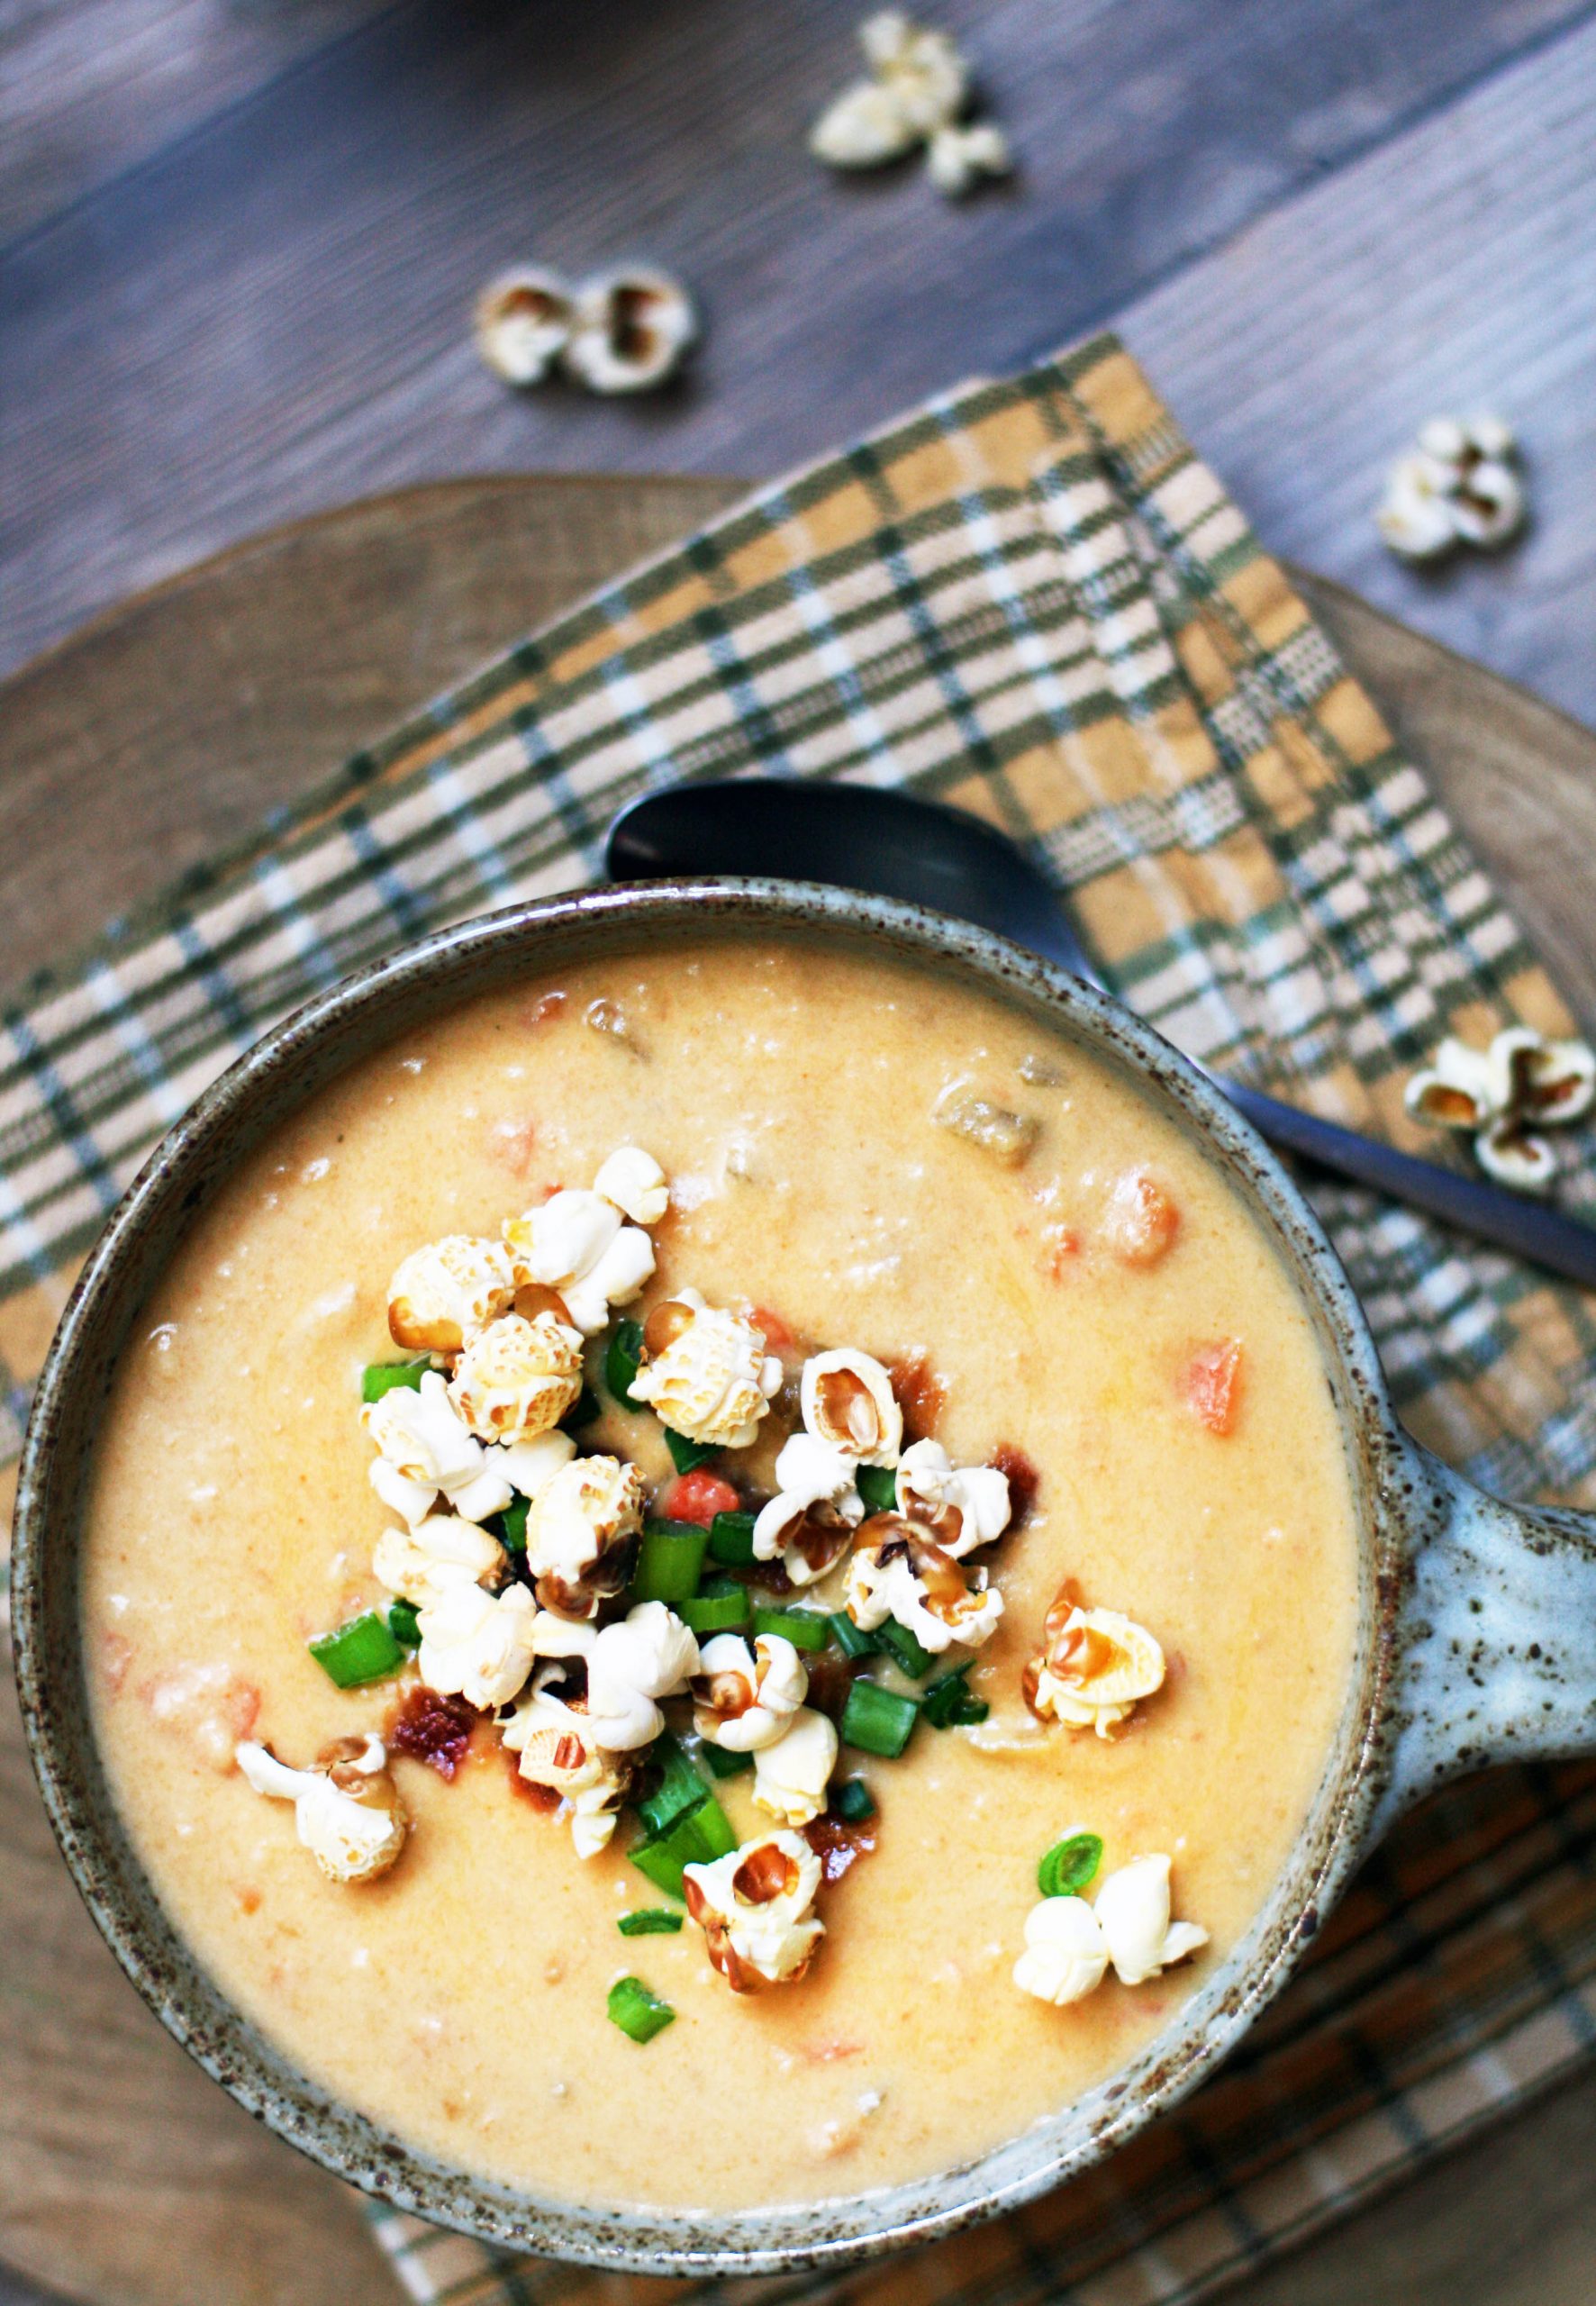 Sharp cheddar and ale soup: If you like beer cheese soup, give this flavorful soup a try!